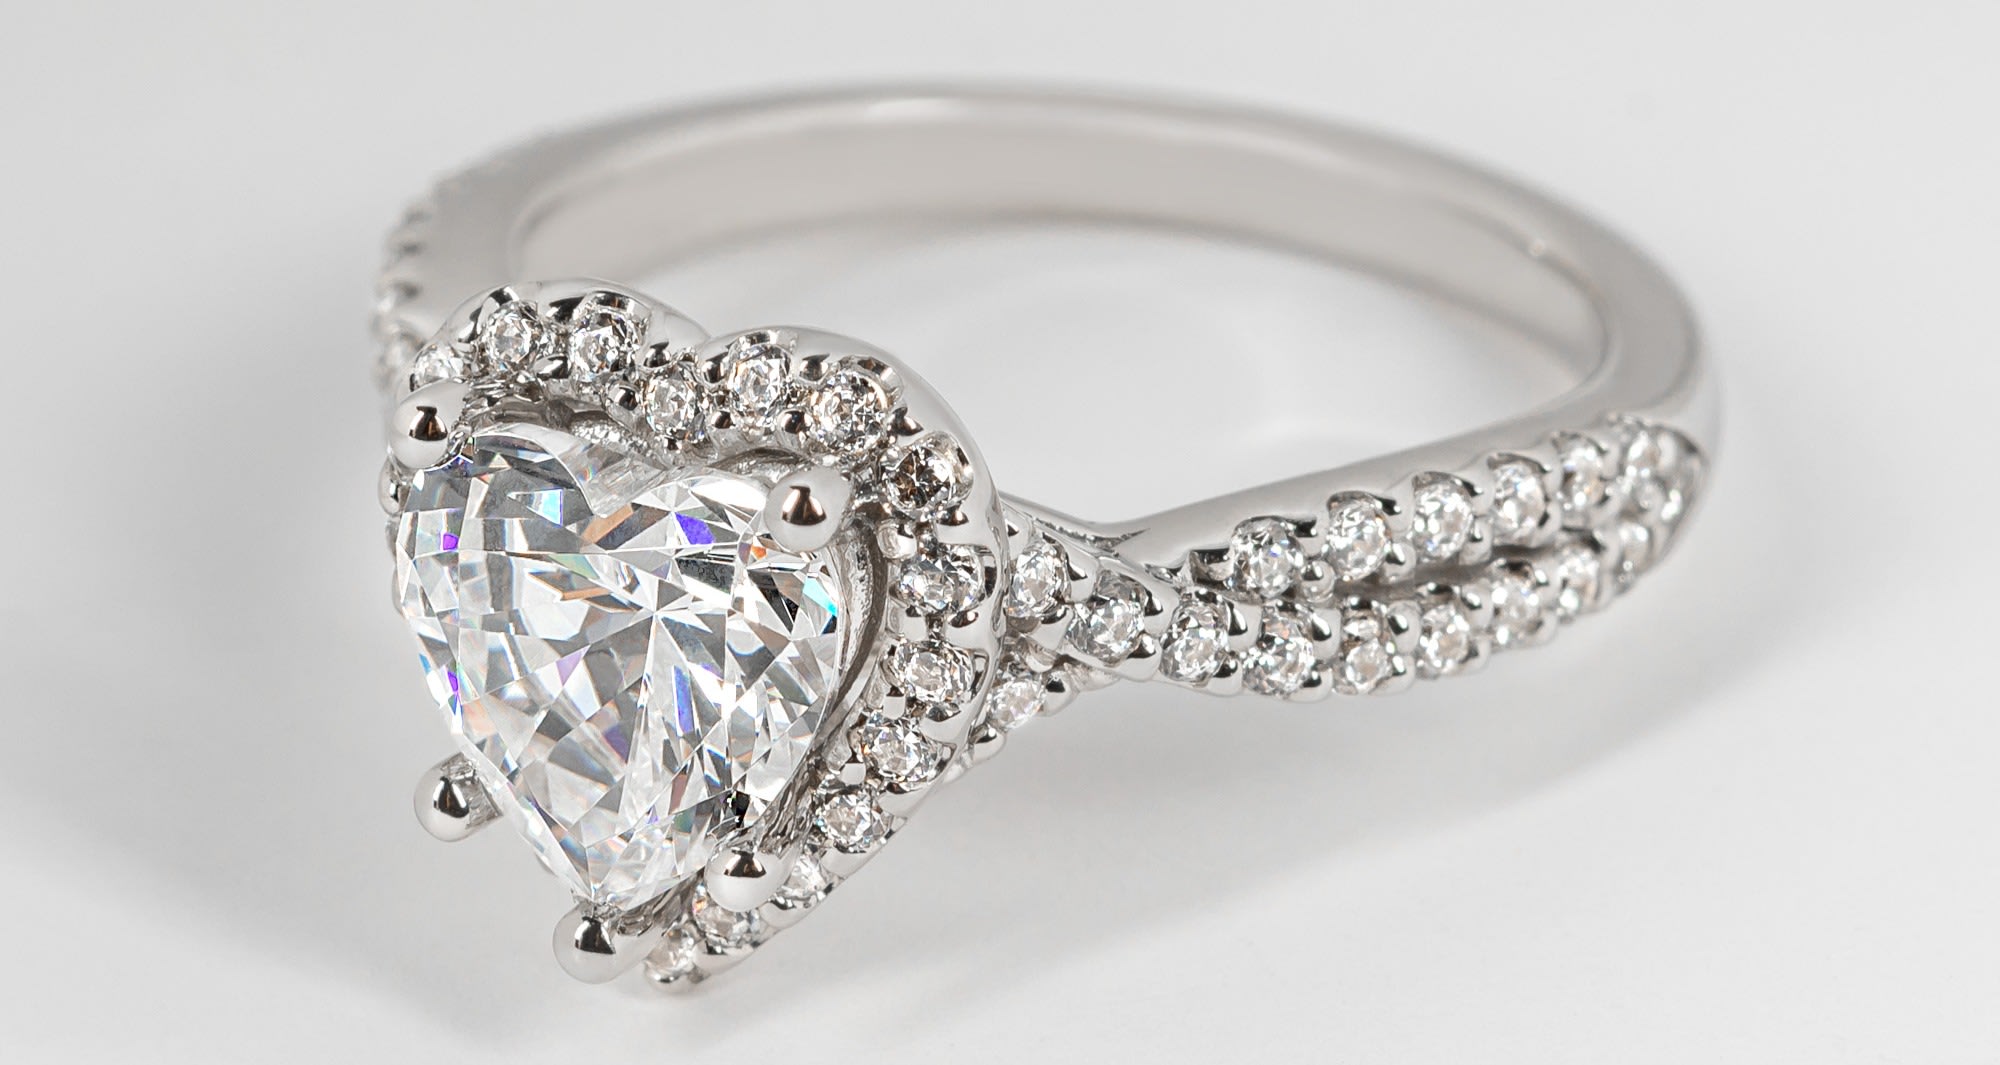 Lush Heart Cut Engagement Ring in 18K White Gold